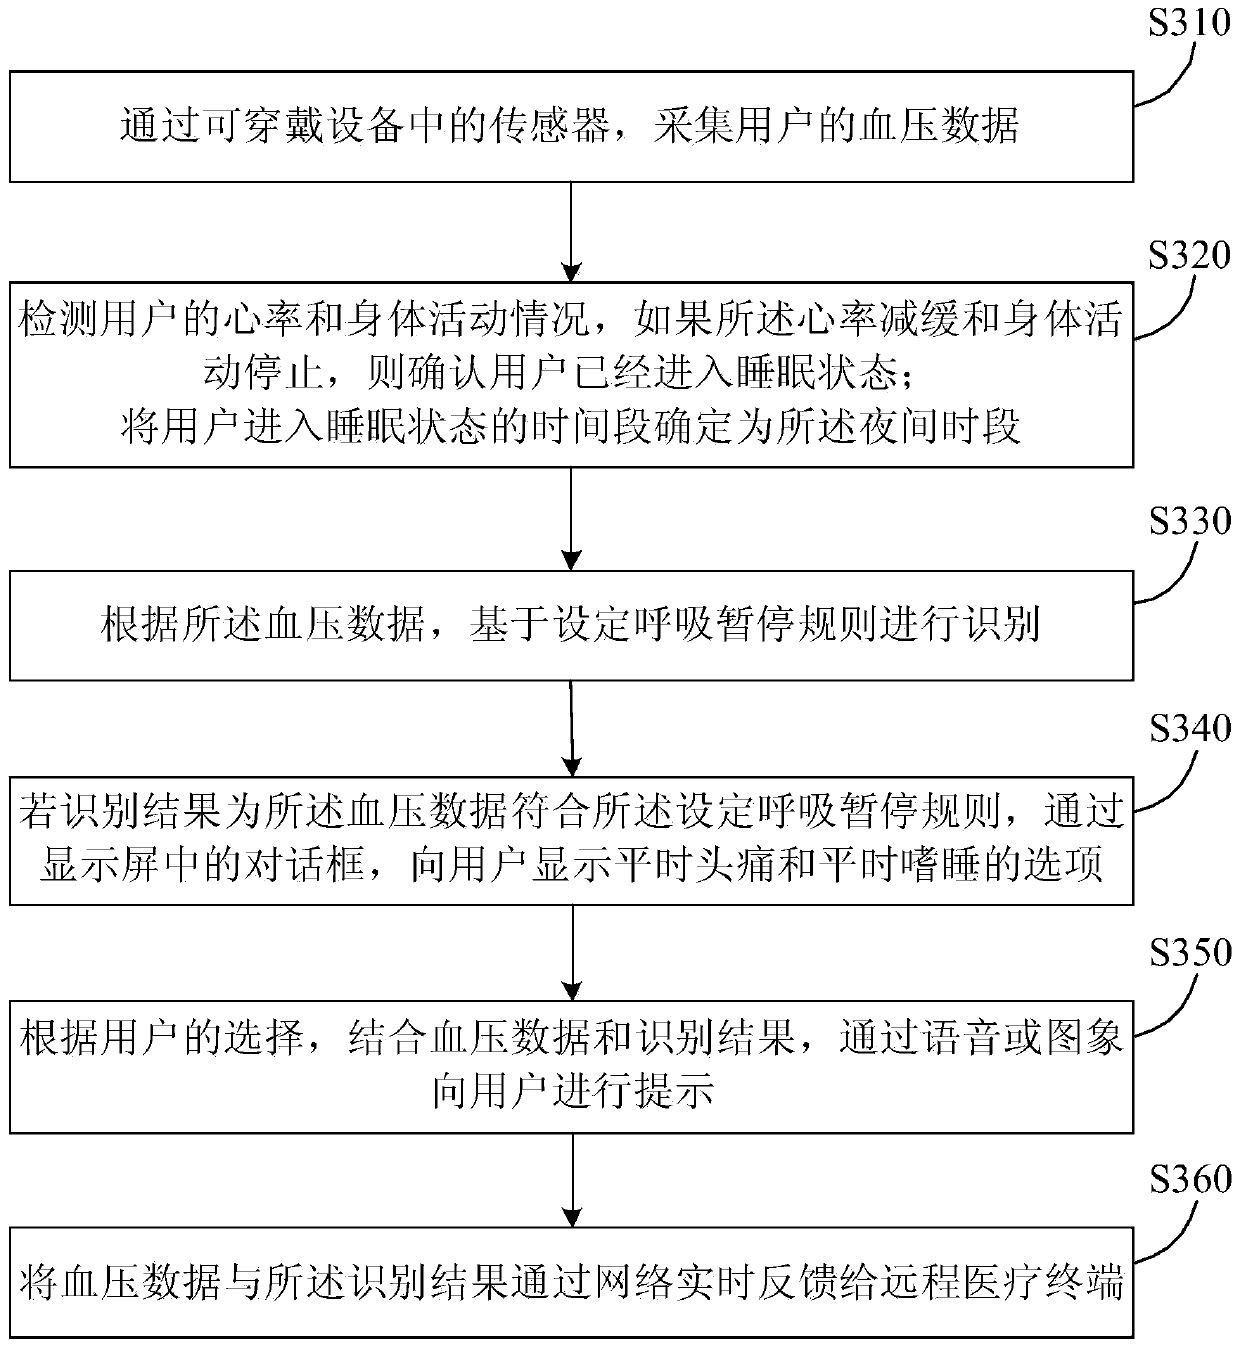 A blood pressure data processing method and wearable device